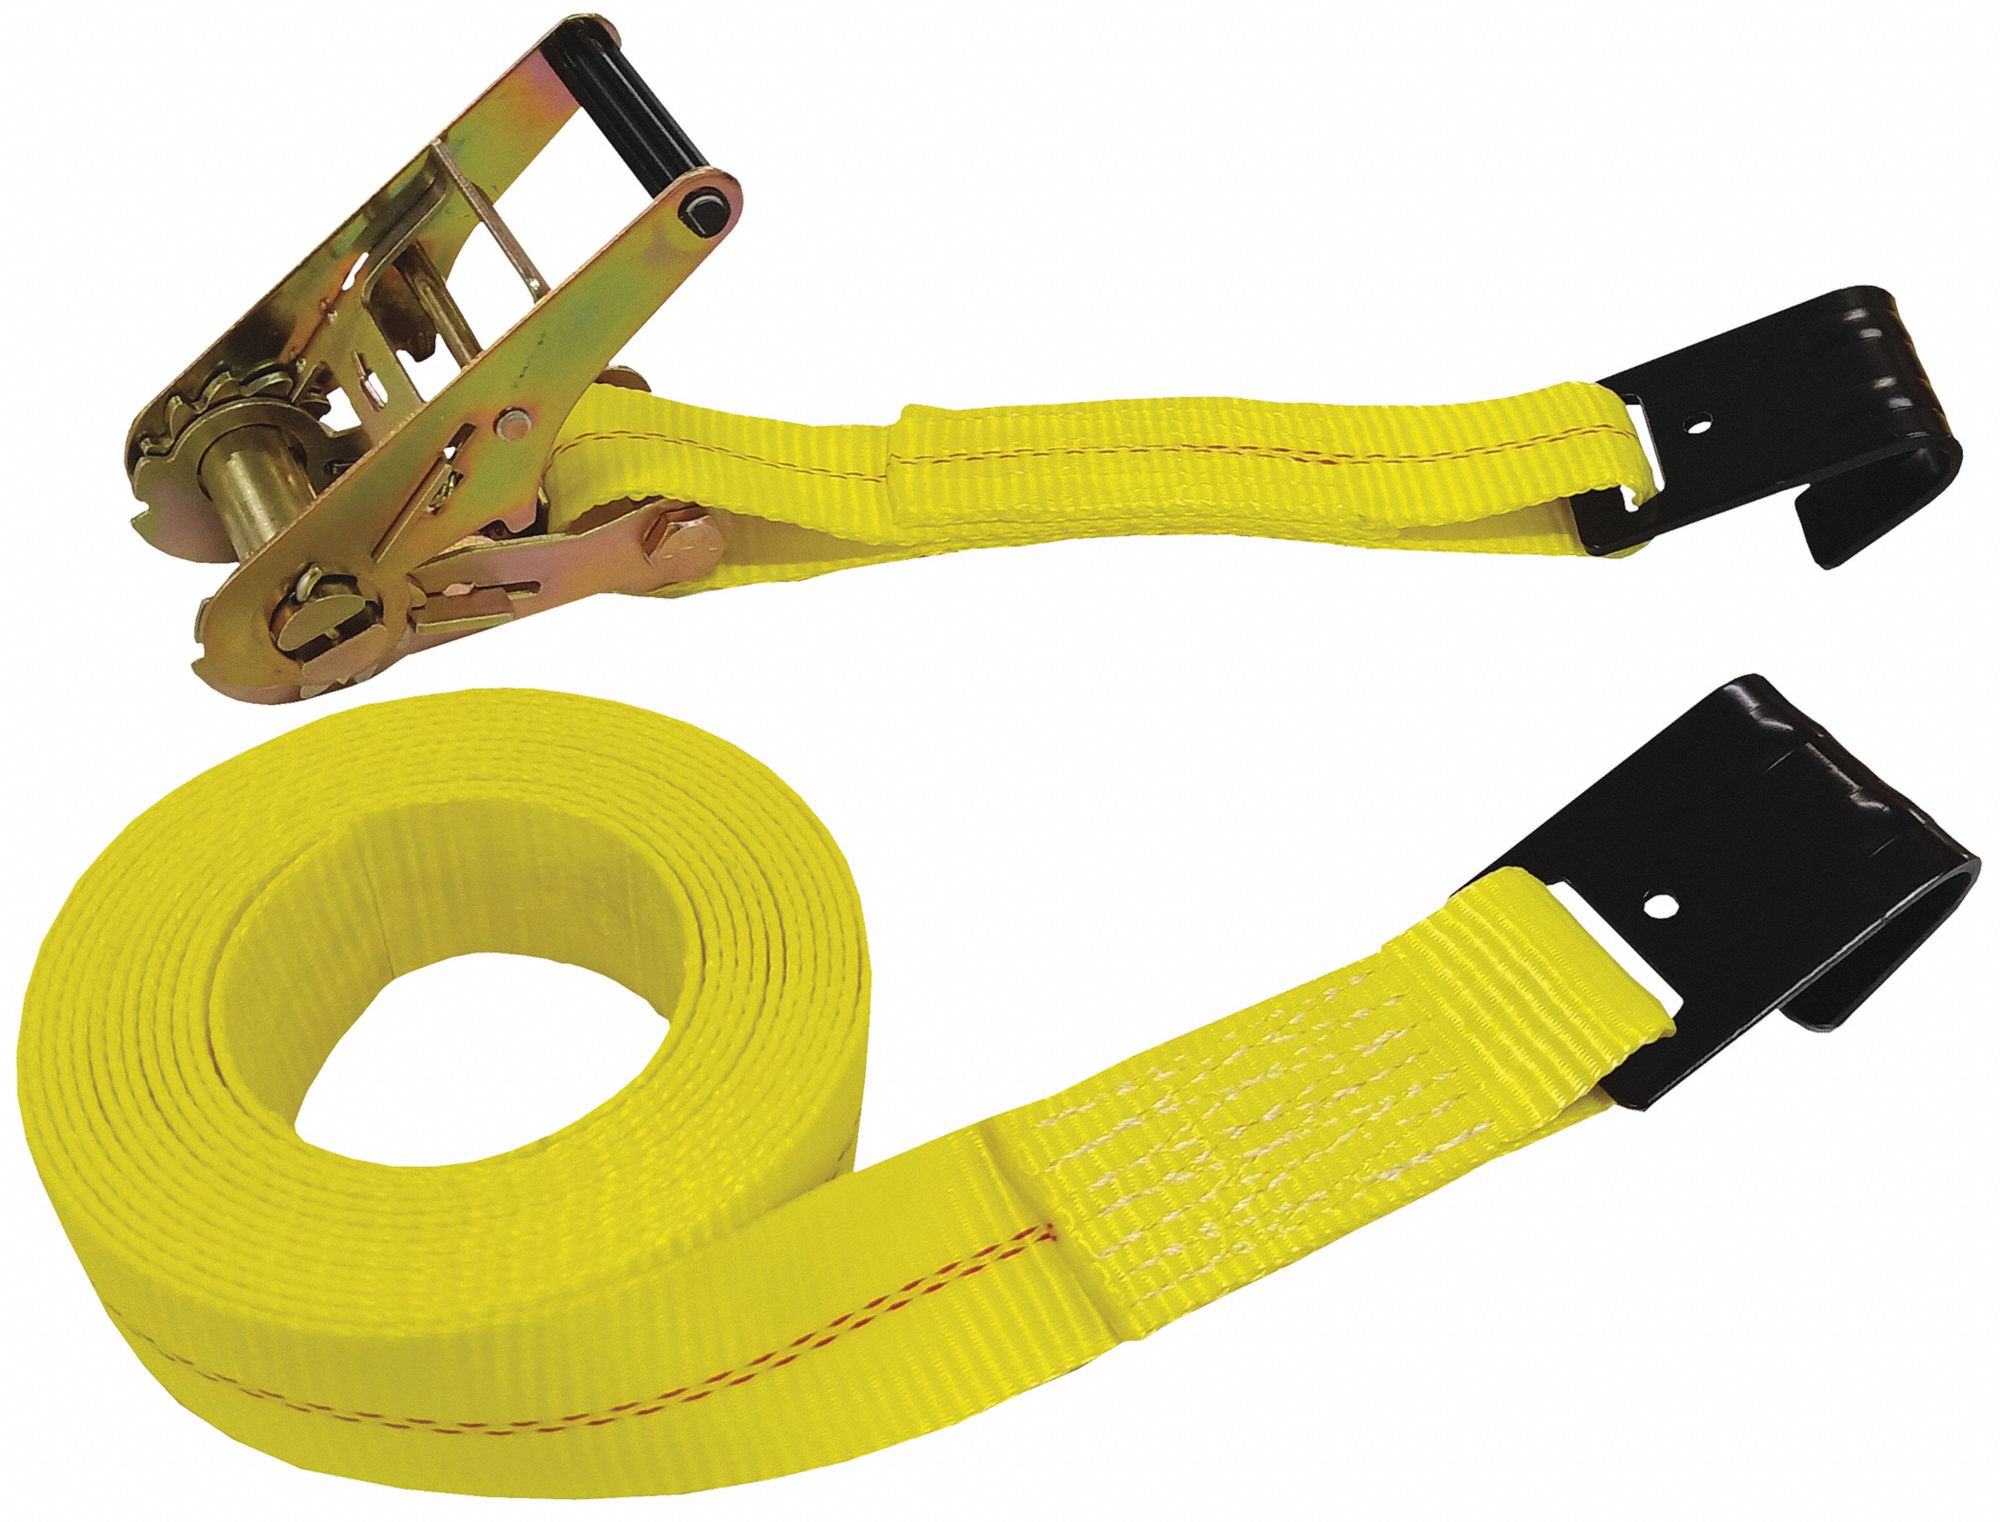 GRAINGER APPROVED Tie Down Strap, 27 ftL x 2 inW, 3,300 lb Load Limit ...